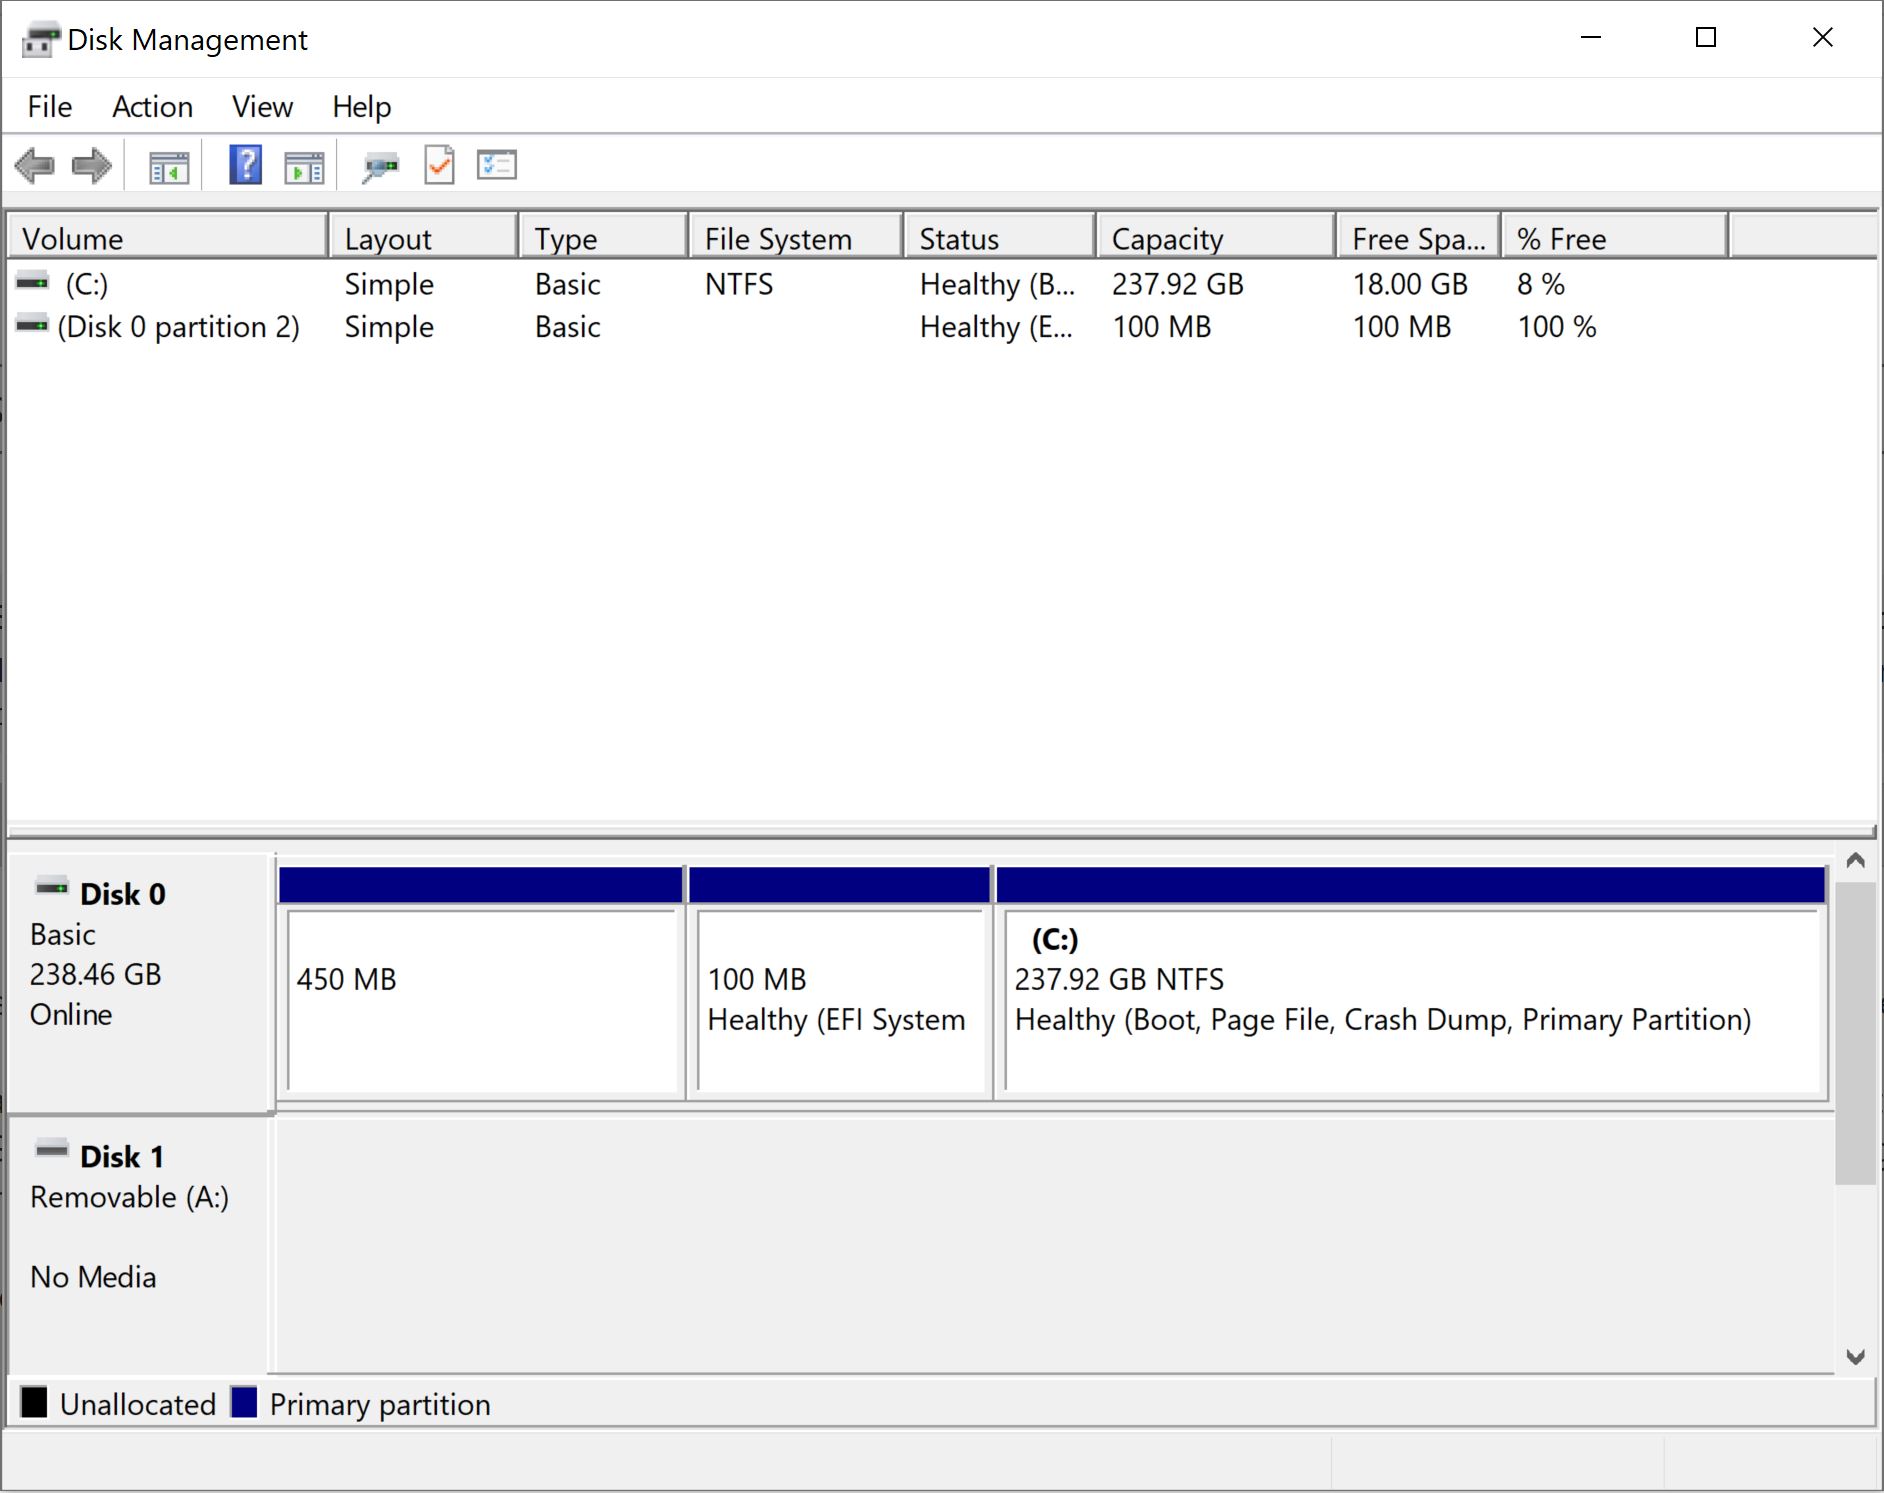 New SSD detected as Disk 1 but "No Media" and 0 mb space. aa1b1675-c7b2-4fcc-a52f-34a7003cabc9?upload=true.jpg